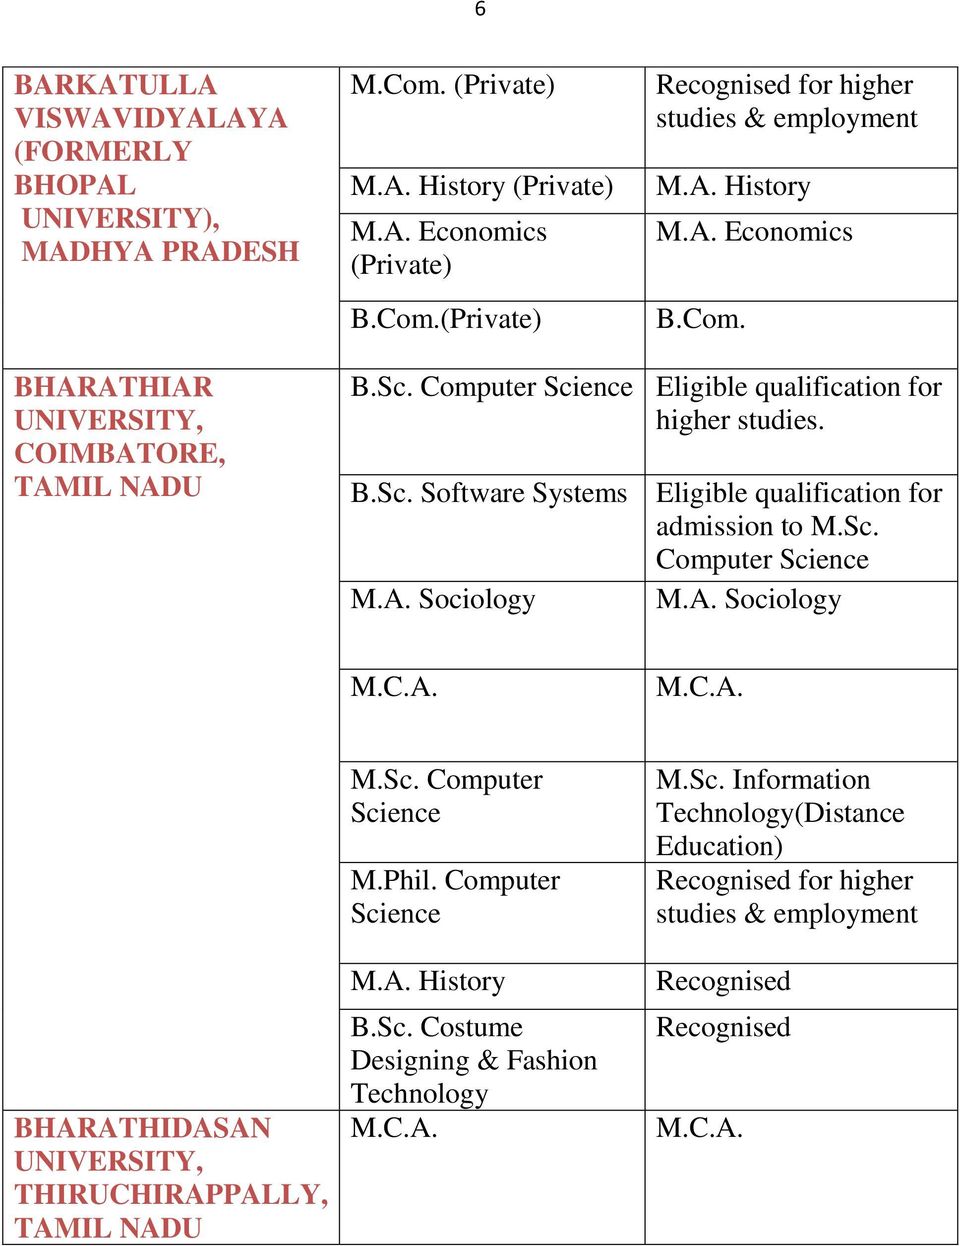 Computer Science Eligible qualification for. B.Sc. Software Systems Eligible qualification for admission to M.Sc. Computer Science M.A.